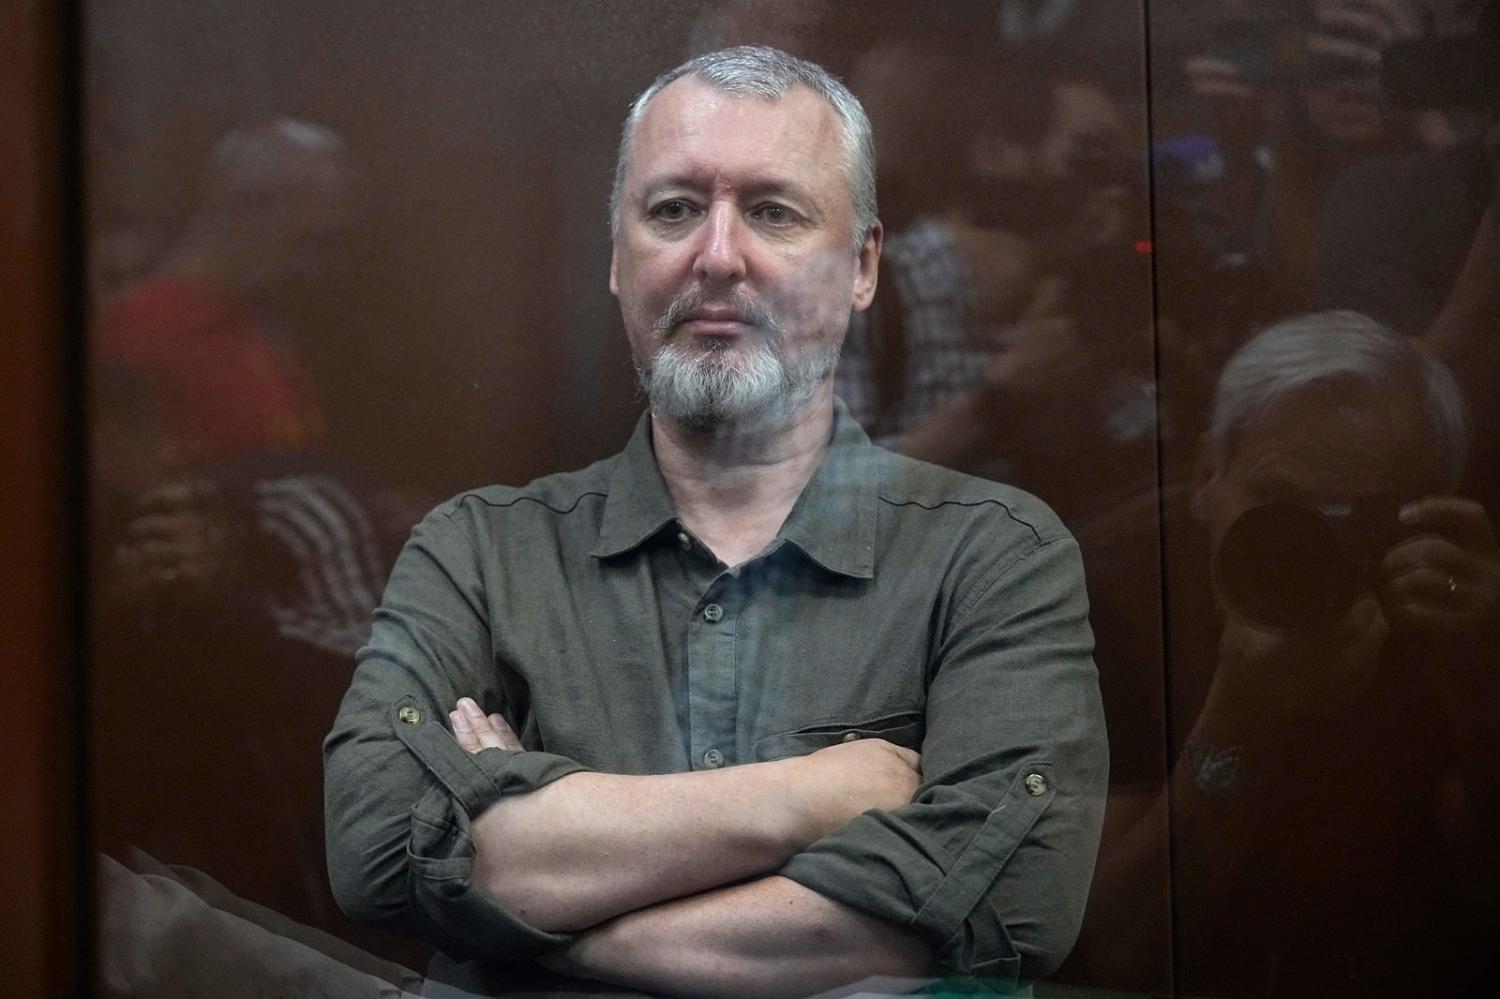 Igor Girkin, the former nationalist blogger accused of extremism, appears at a hearing in Moscow on 21 July 2023 (Alexander Zemlianichenko/AFP via Getty Images)